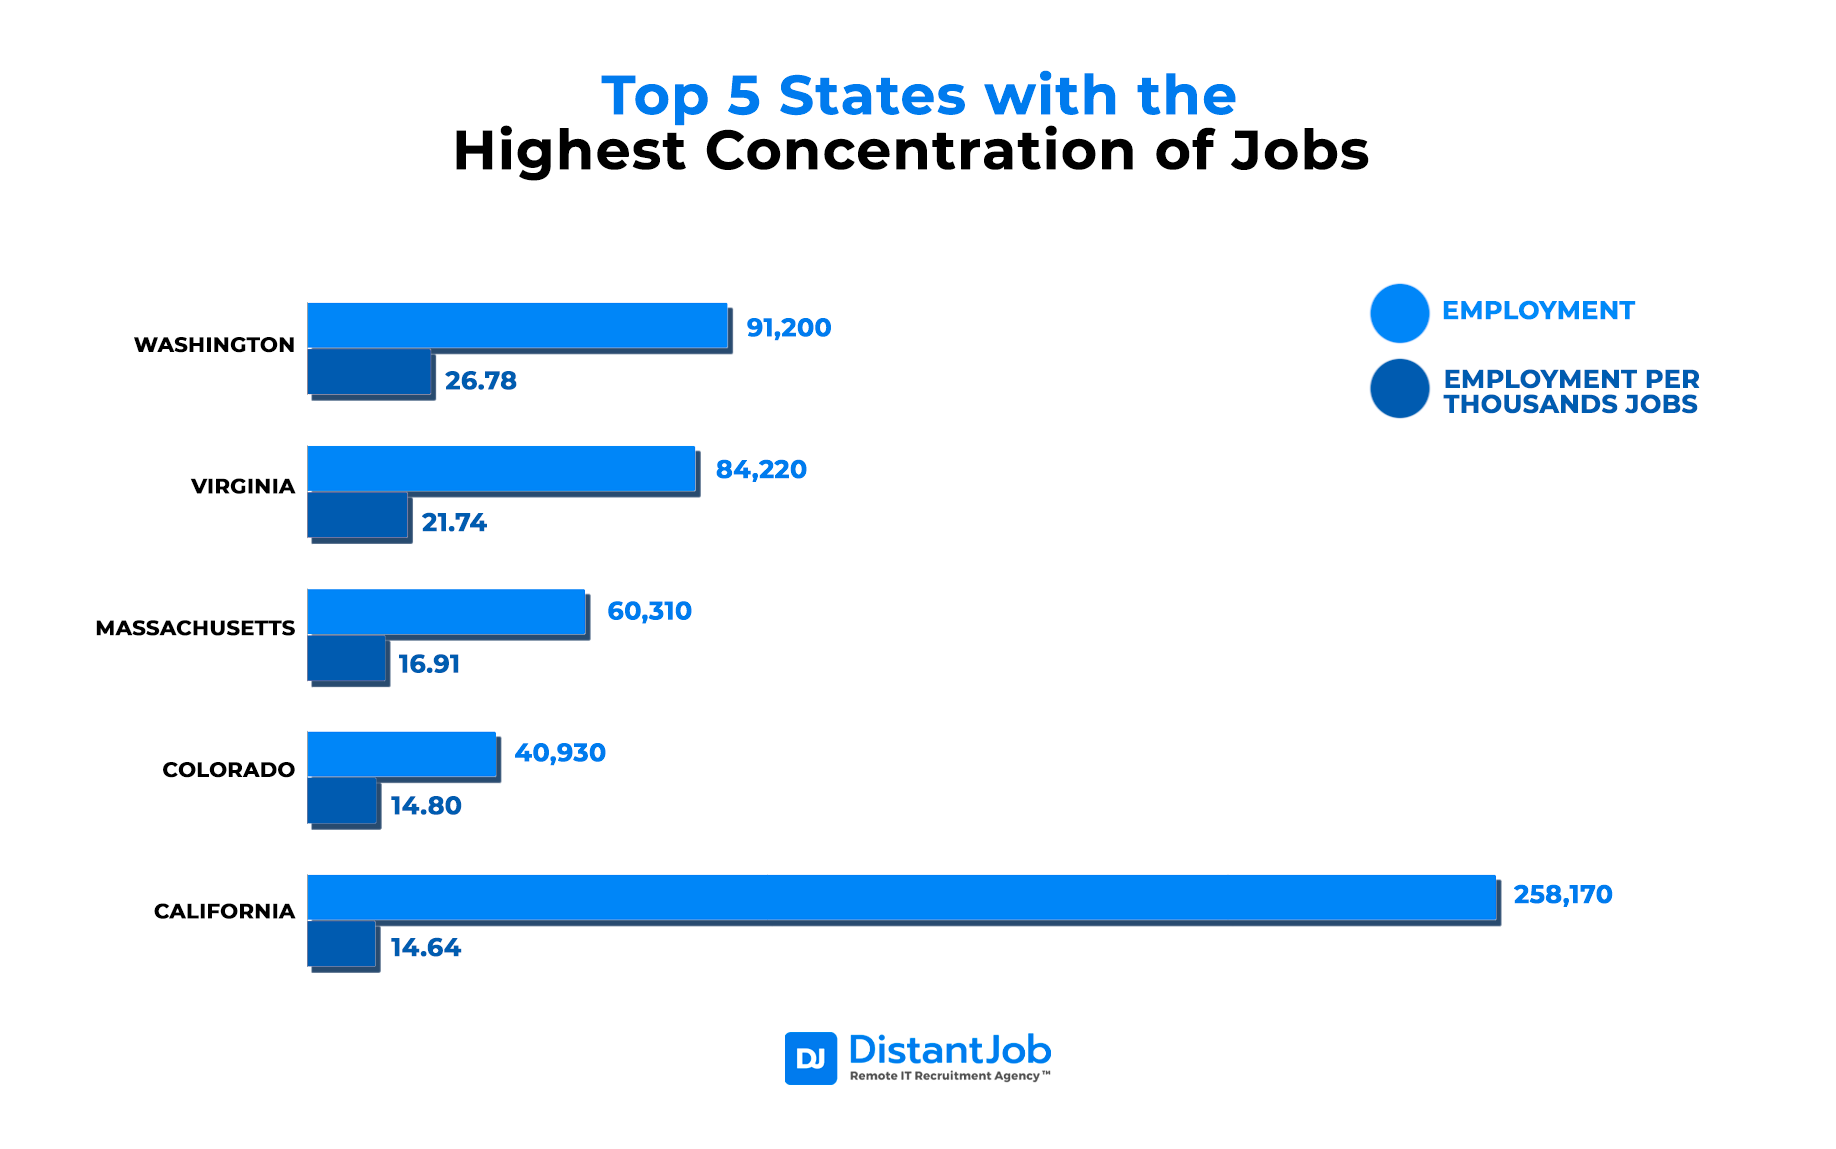 Top states with the highest concentration of jobs